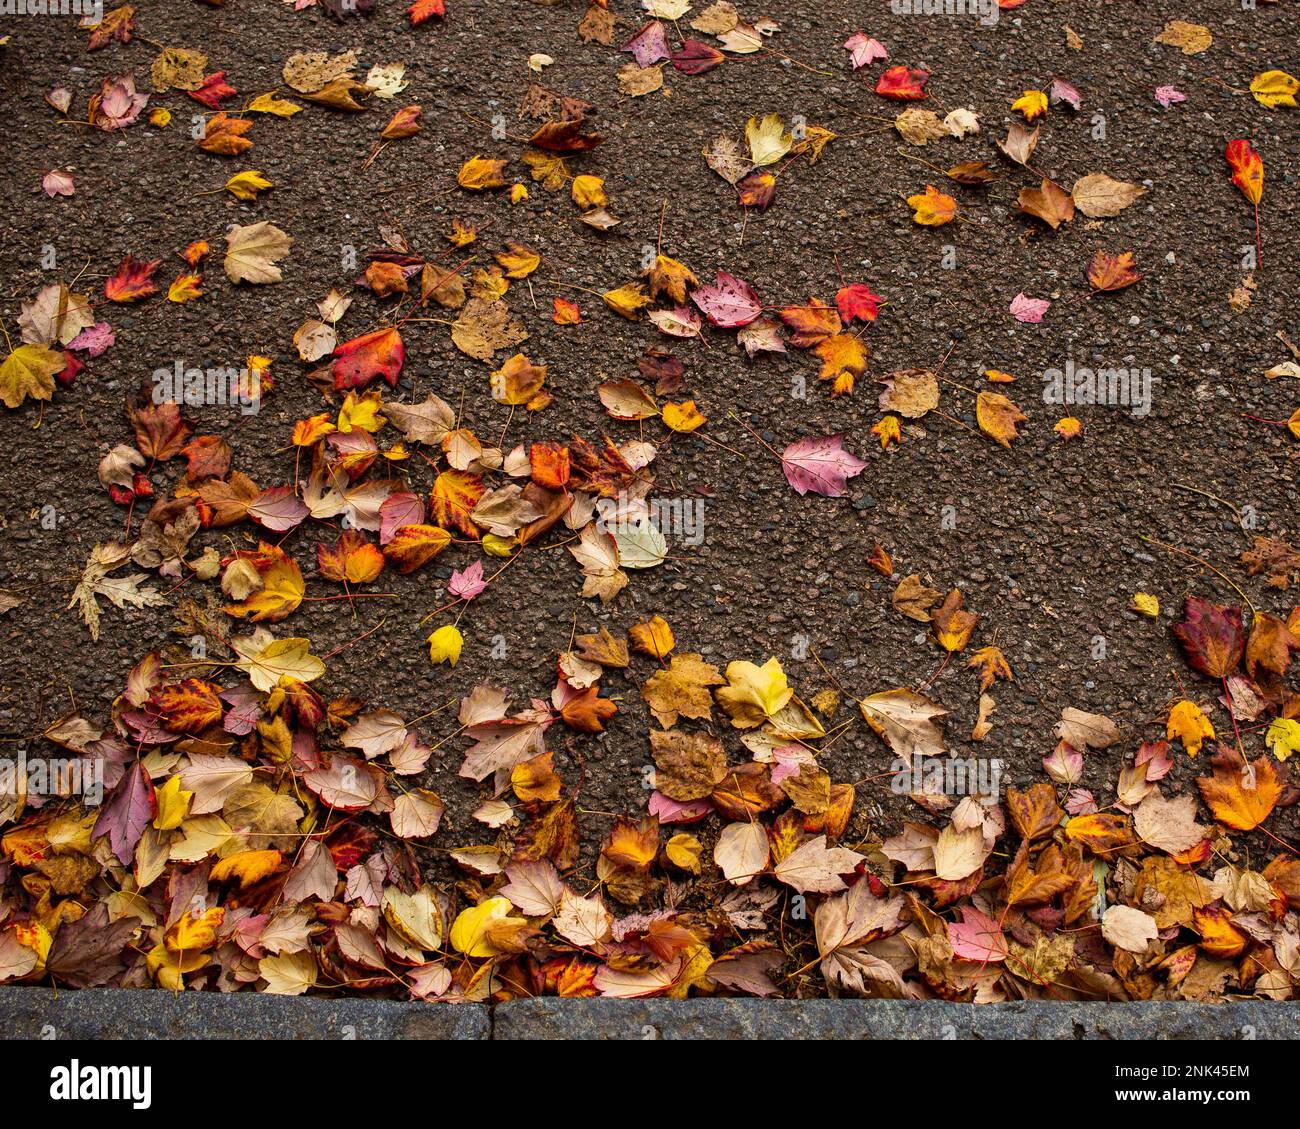 A scattering of brightly coloured leaves on a road surface in autumn/fall. Suitable as background image to add extra text and other objects Stock Photo